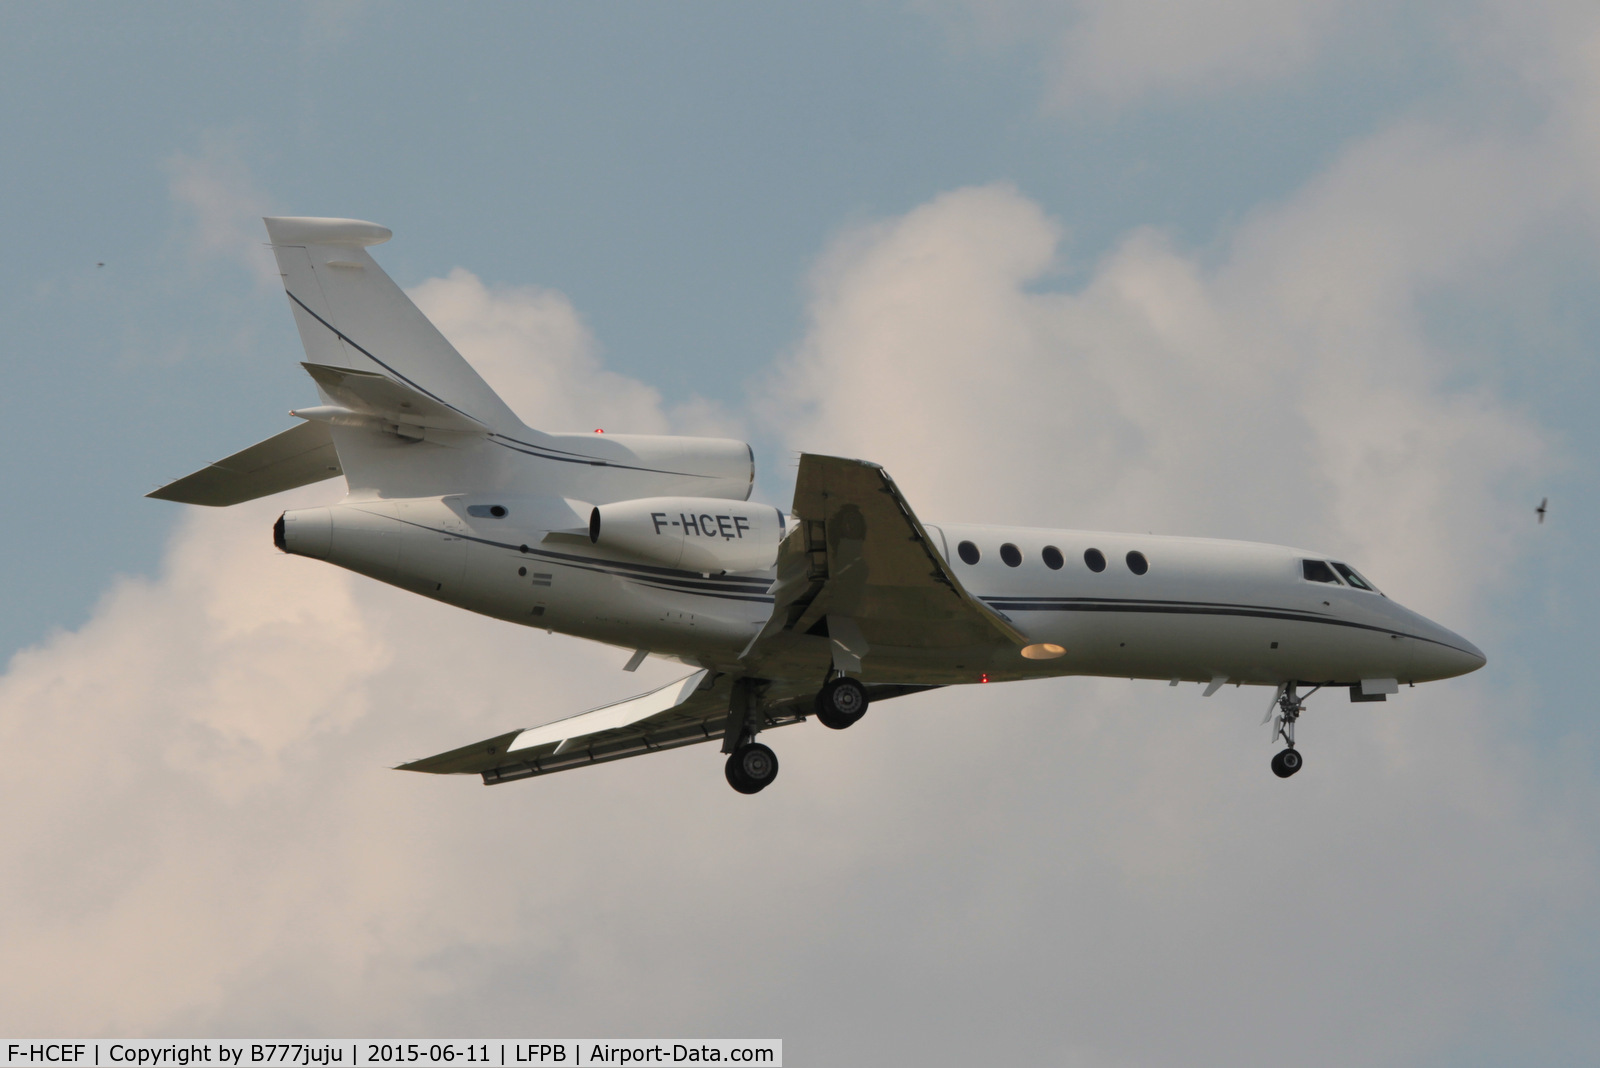 F-HCEF, 2001 Dassault Falcon 50EX C/N 306, at Le Bourget with new peint